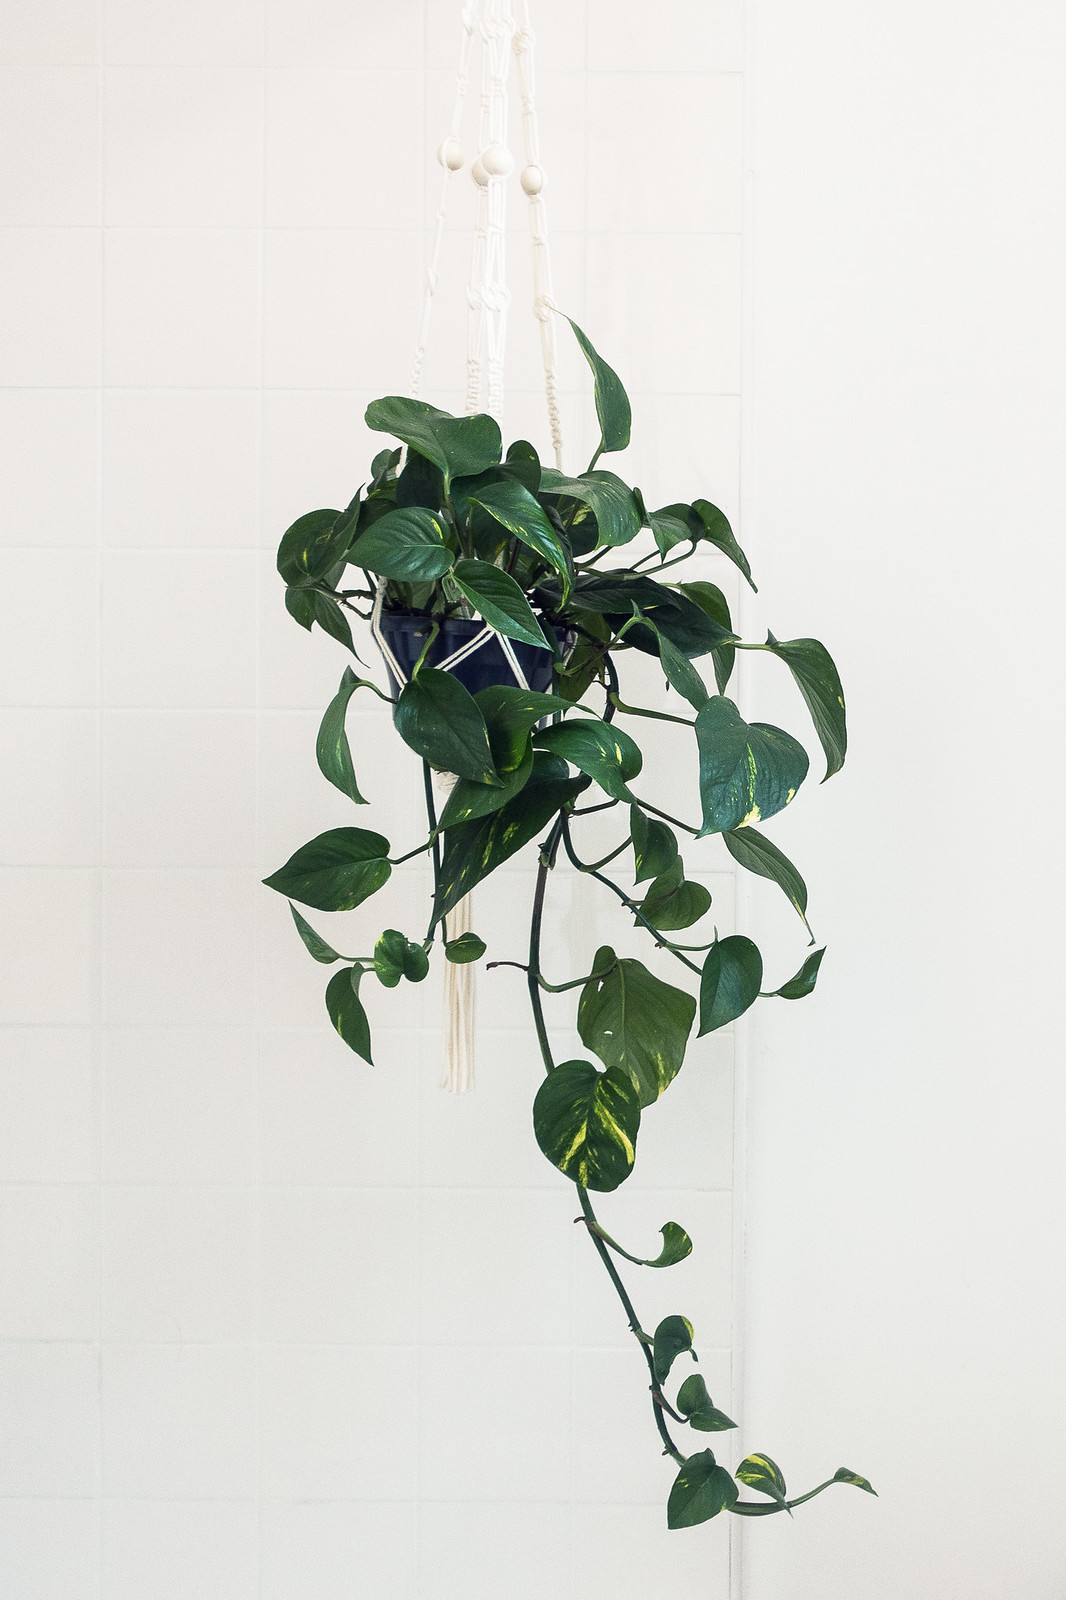 Shower Plants: 5 Plants That Thrive In Your Bathroom